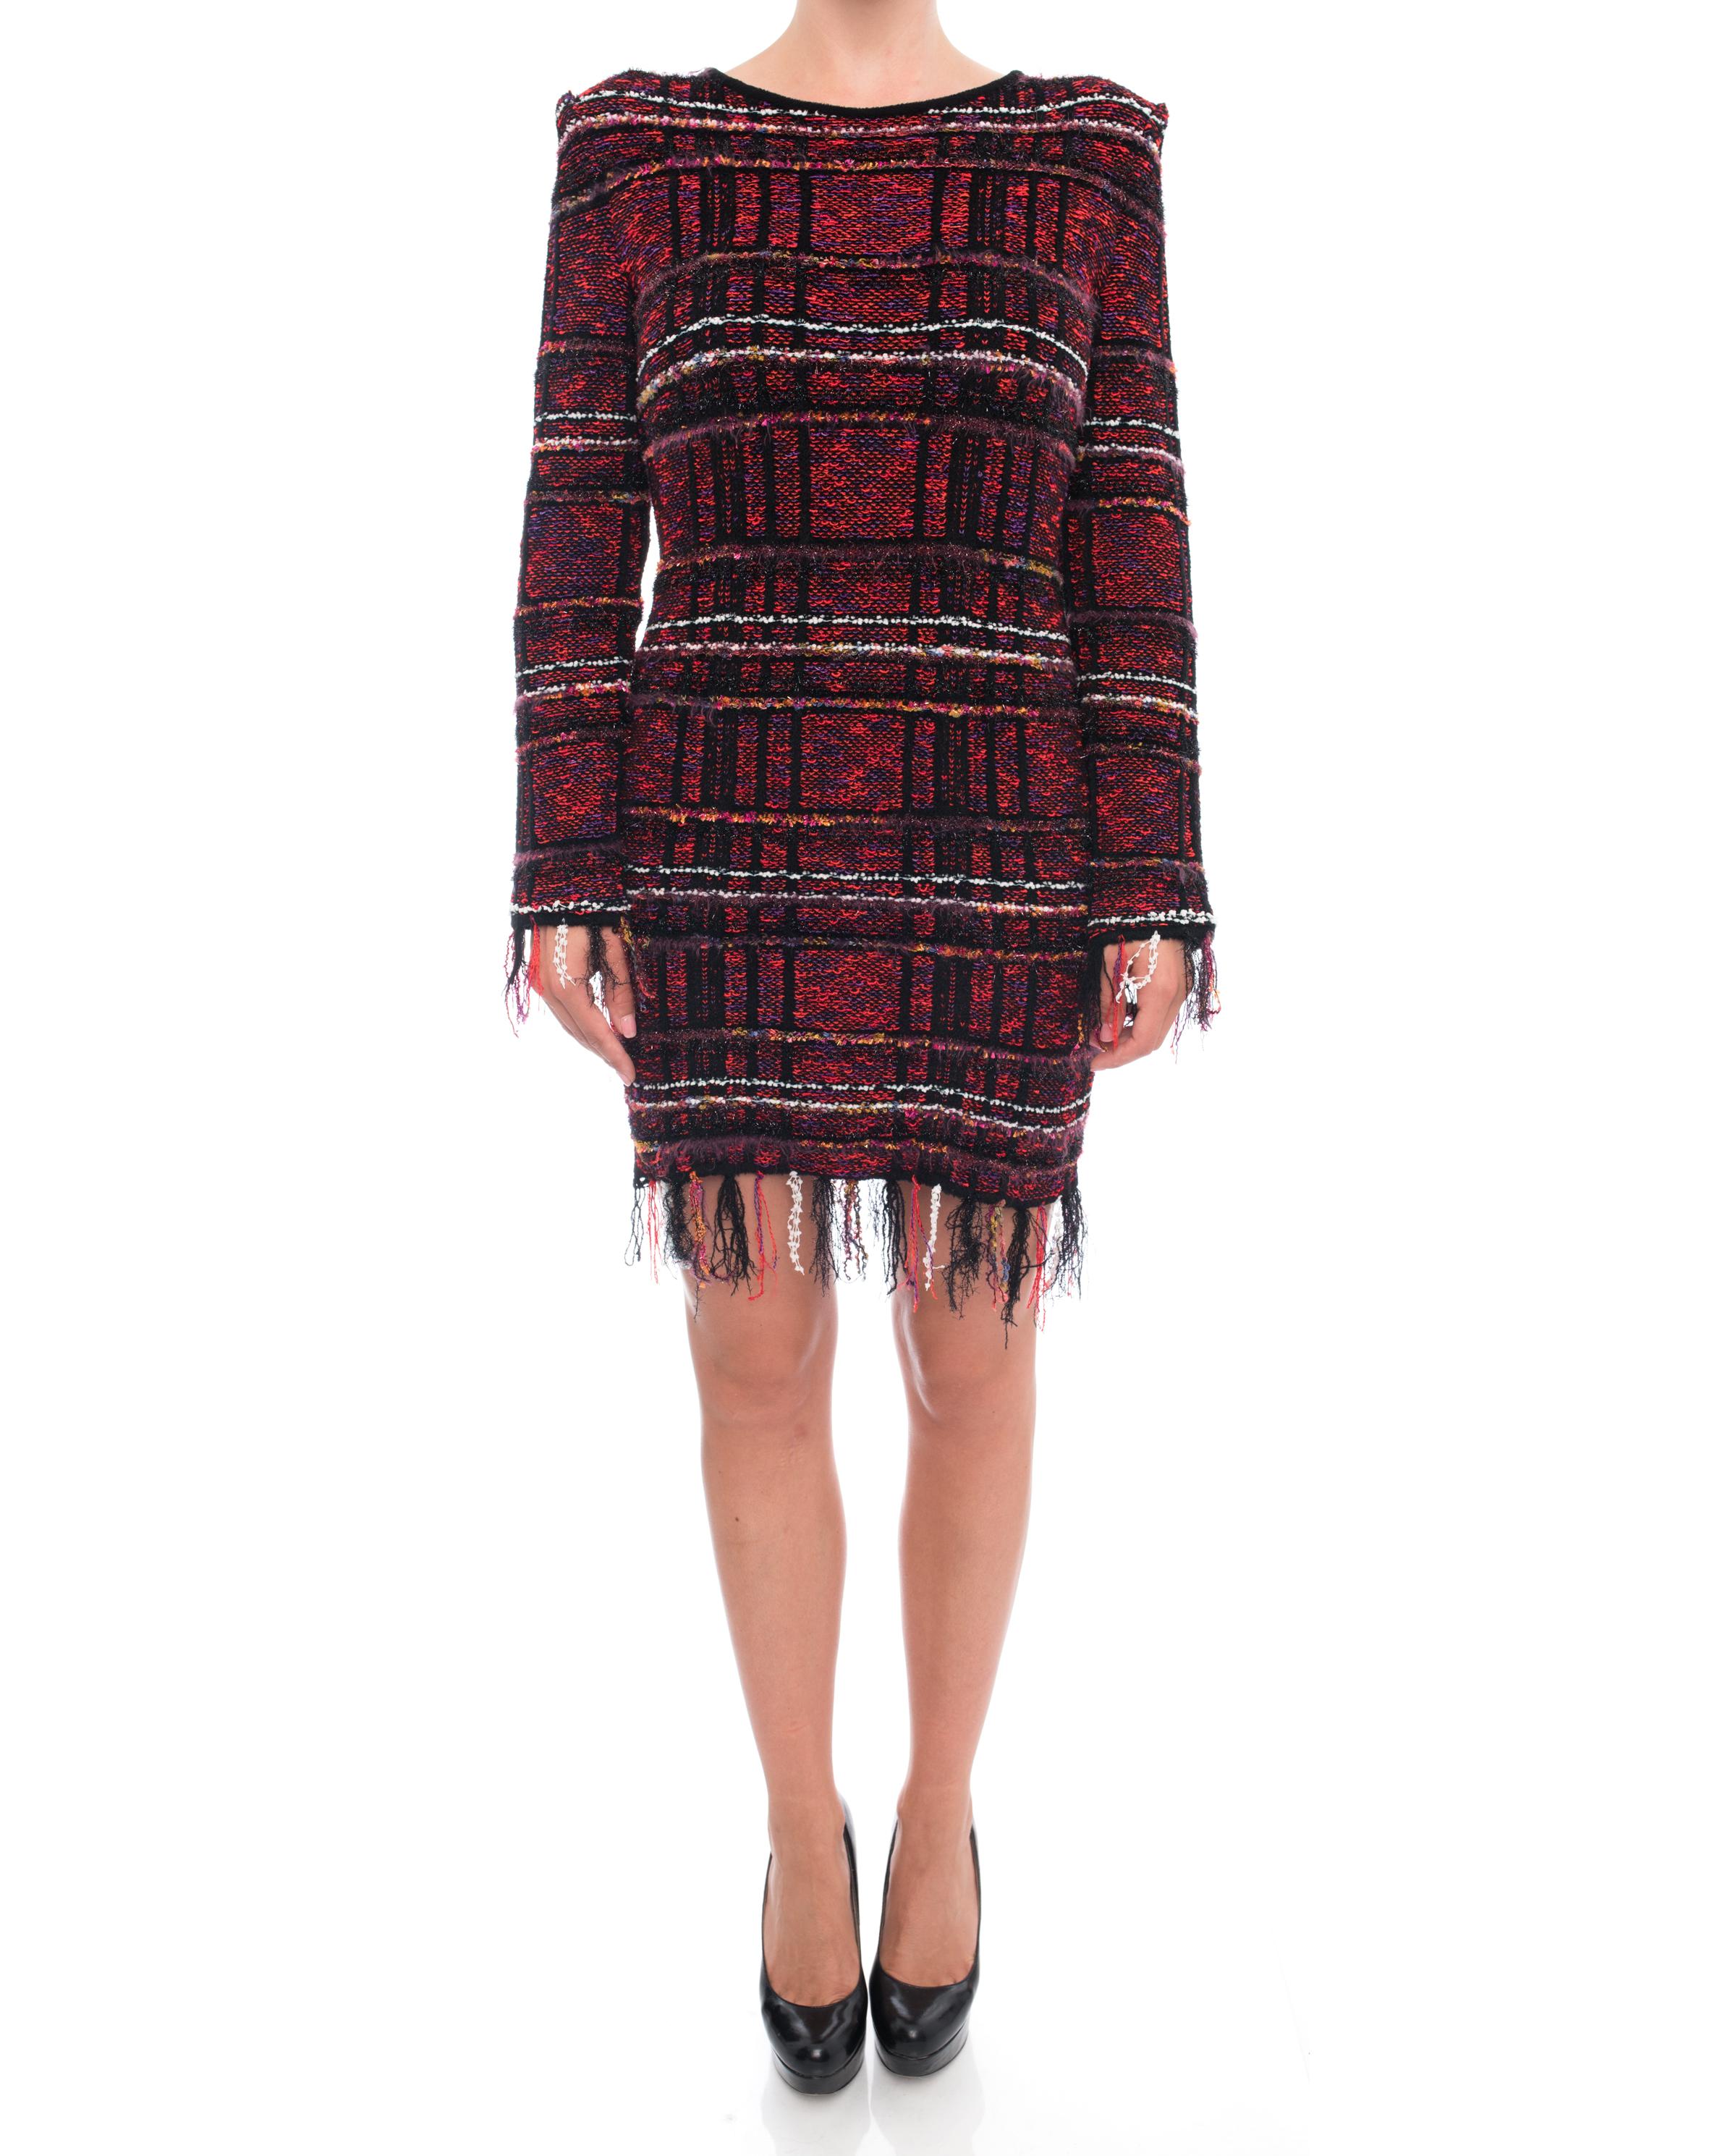 Balmain Pre-fall 2017 Red Check Fringe Knit Dress.  Fringed cuff and skirt hem, gold centre back zipper, padded strong shoulder, long sleeve.  Stretchy knit material in red, white, black check pattern.  Marked size FR 42 (USA 10).  Garment is very